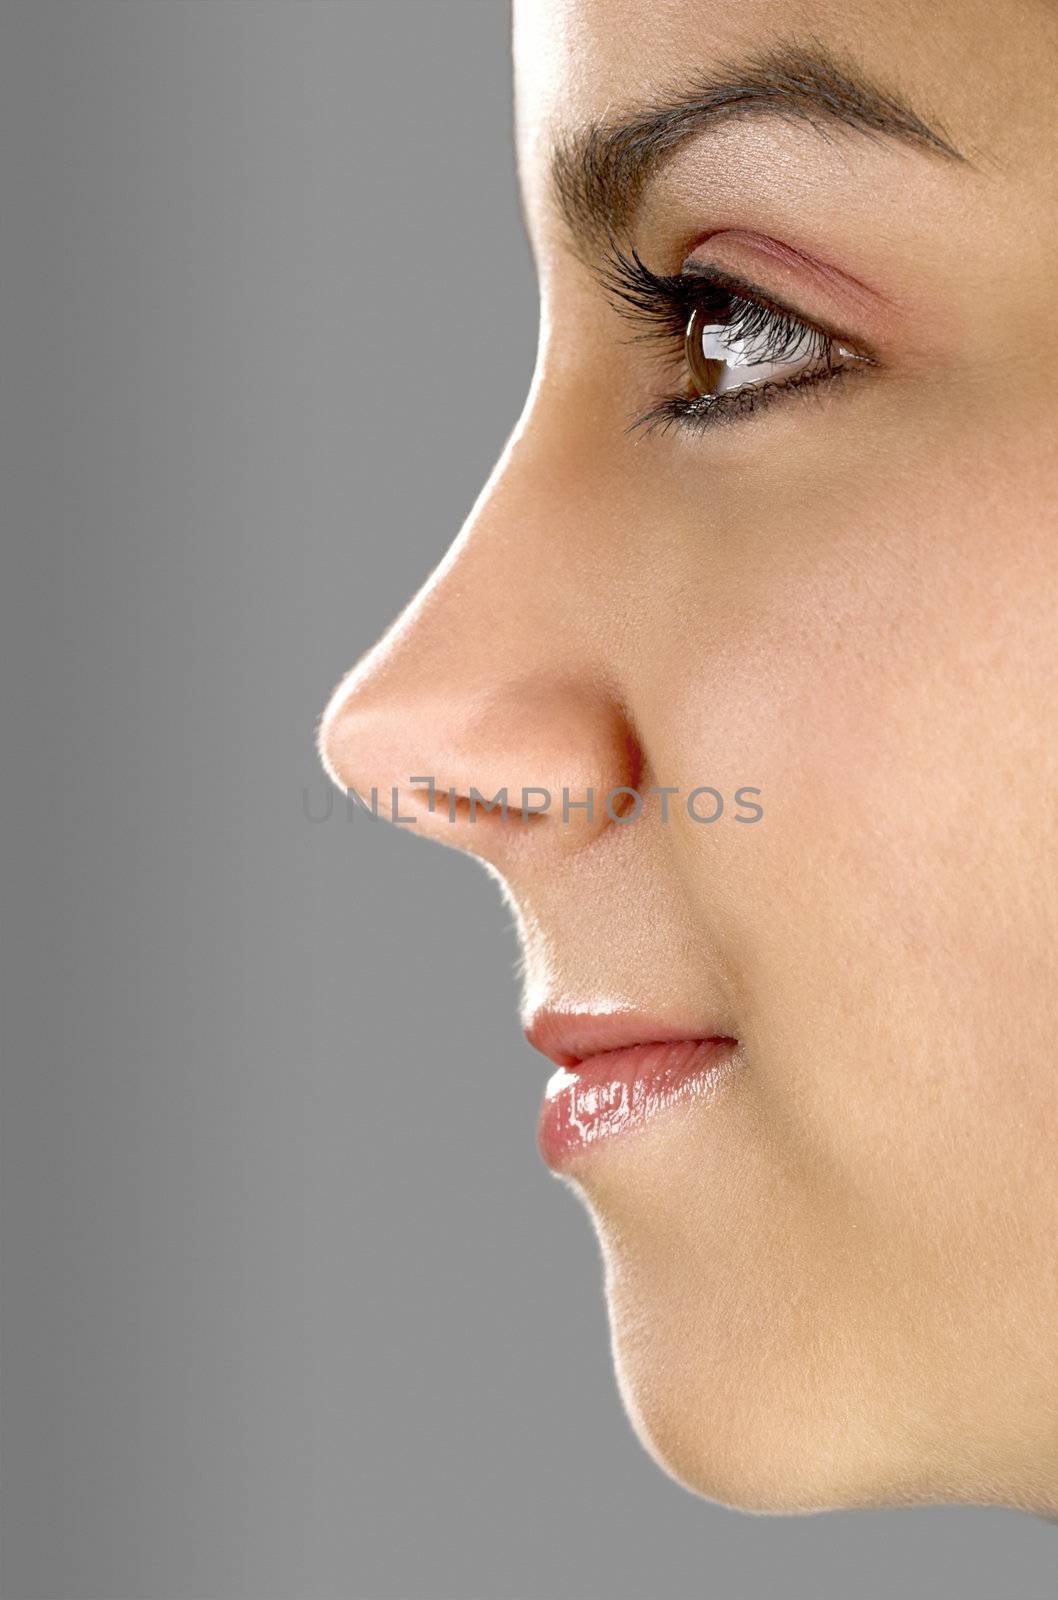 Profile portrait of a young and beautiful woman